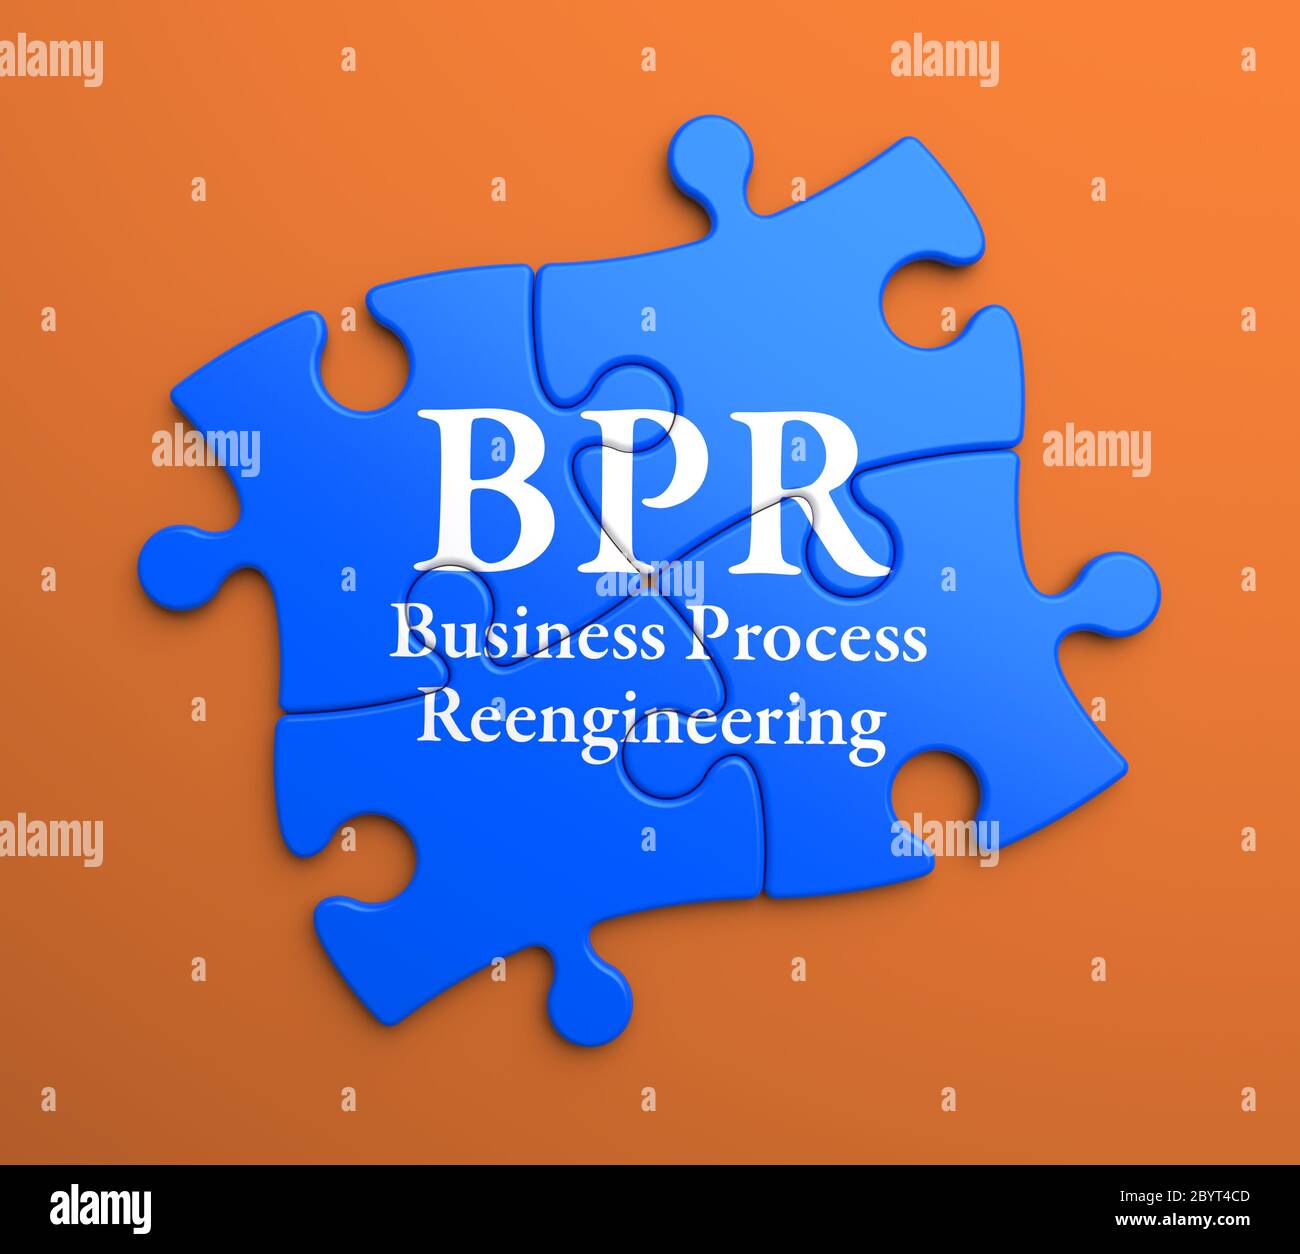 BPR - Business Process Reengineering - Written on Blue Puzzle Pieces on Orange Background. Business Concept. Stock Photo